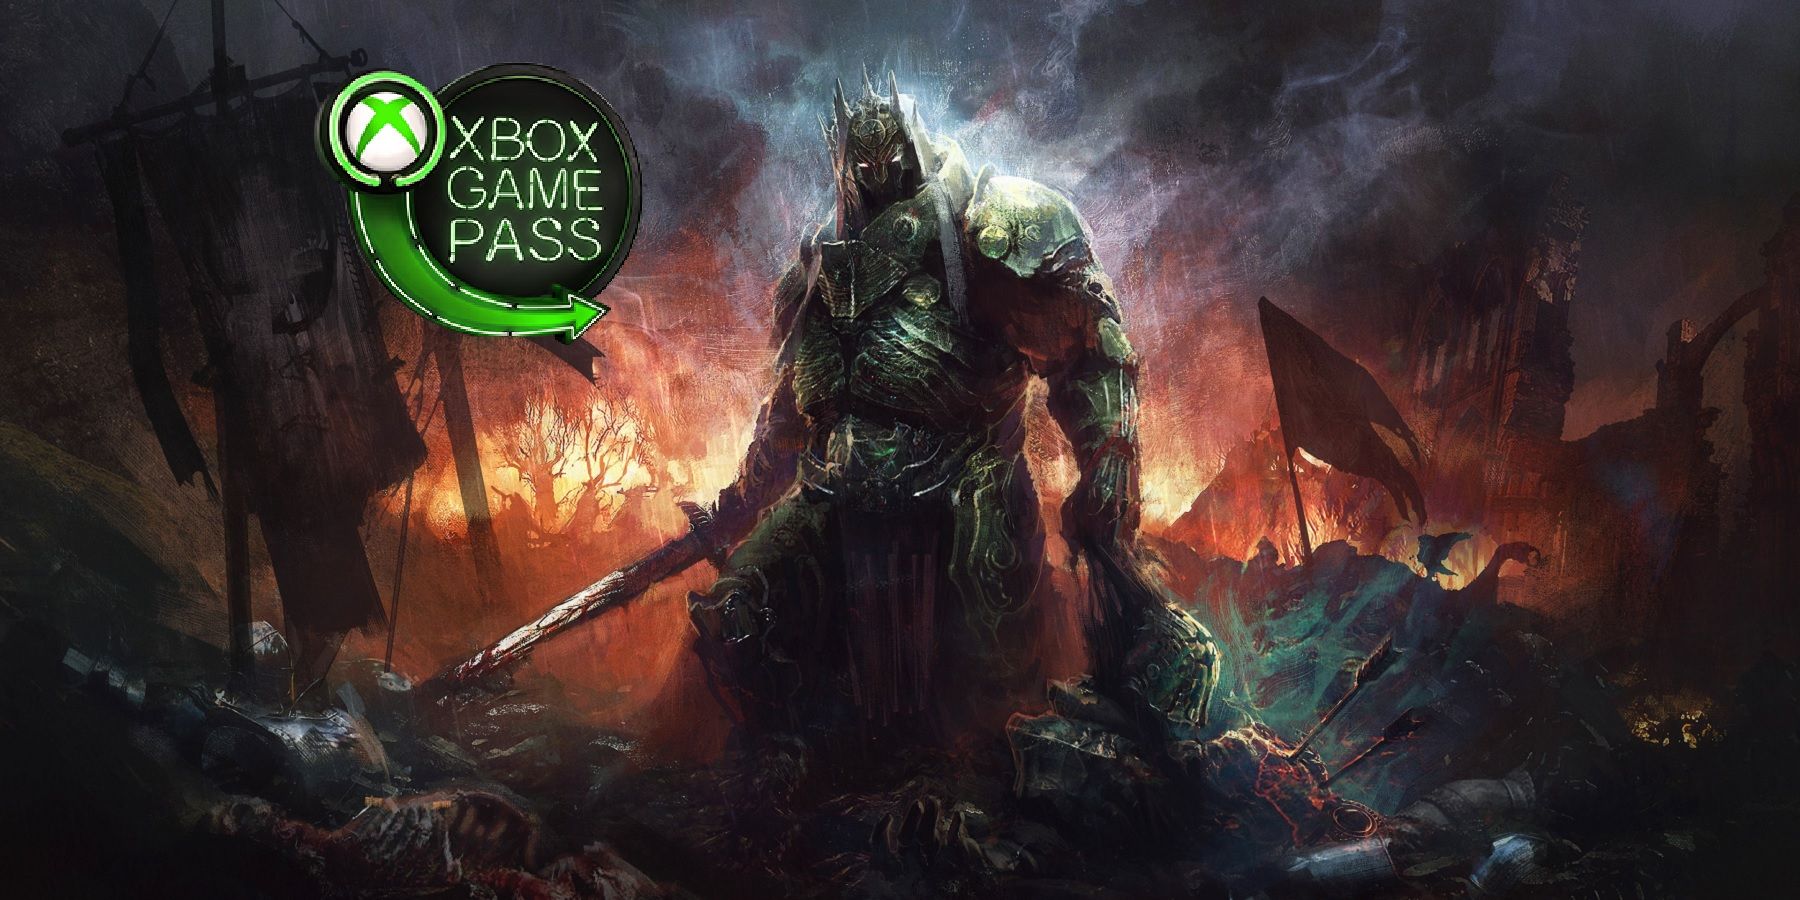 Xbox Game Pass Adds 3 New Games Today